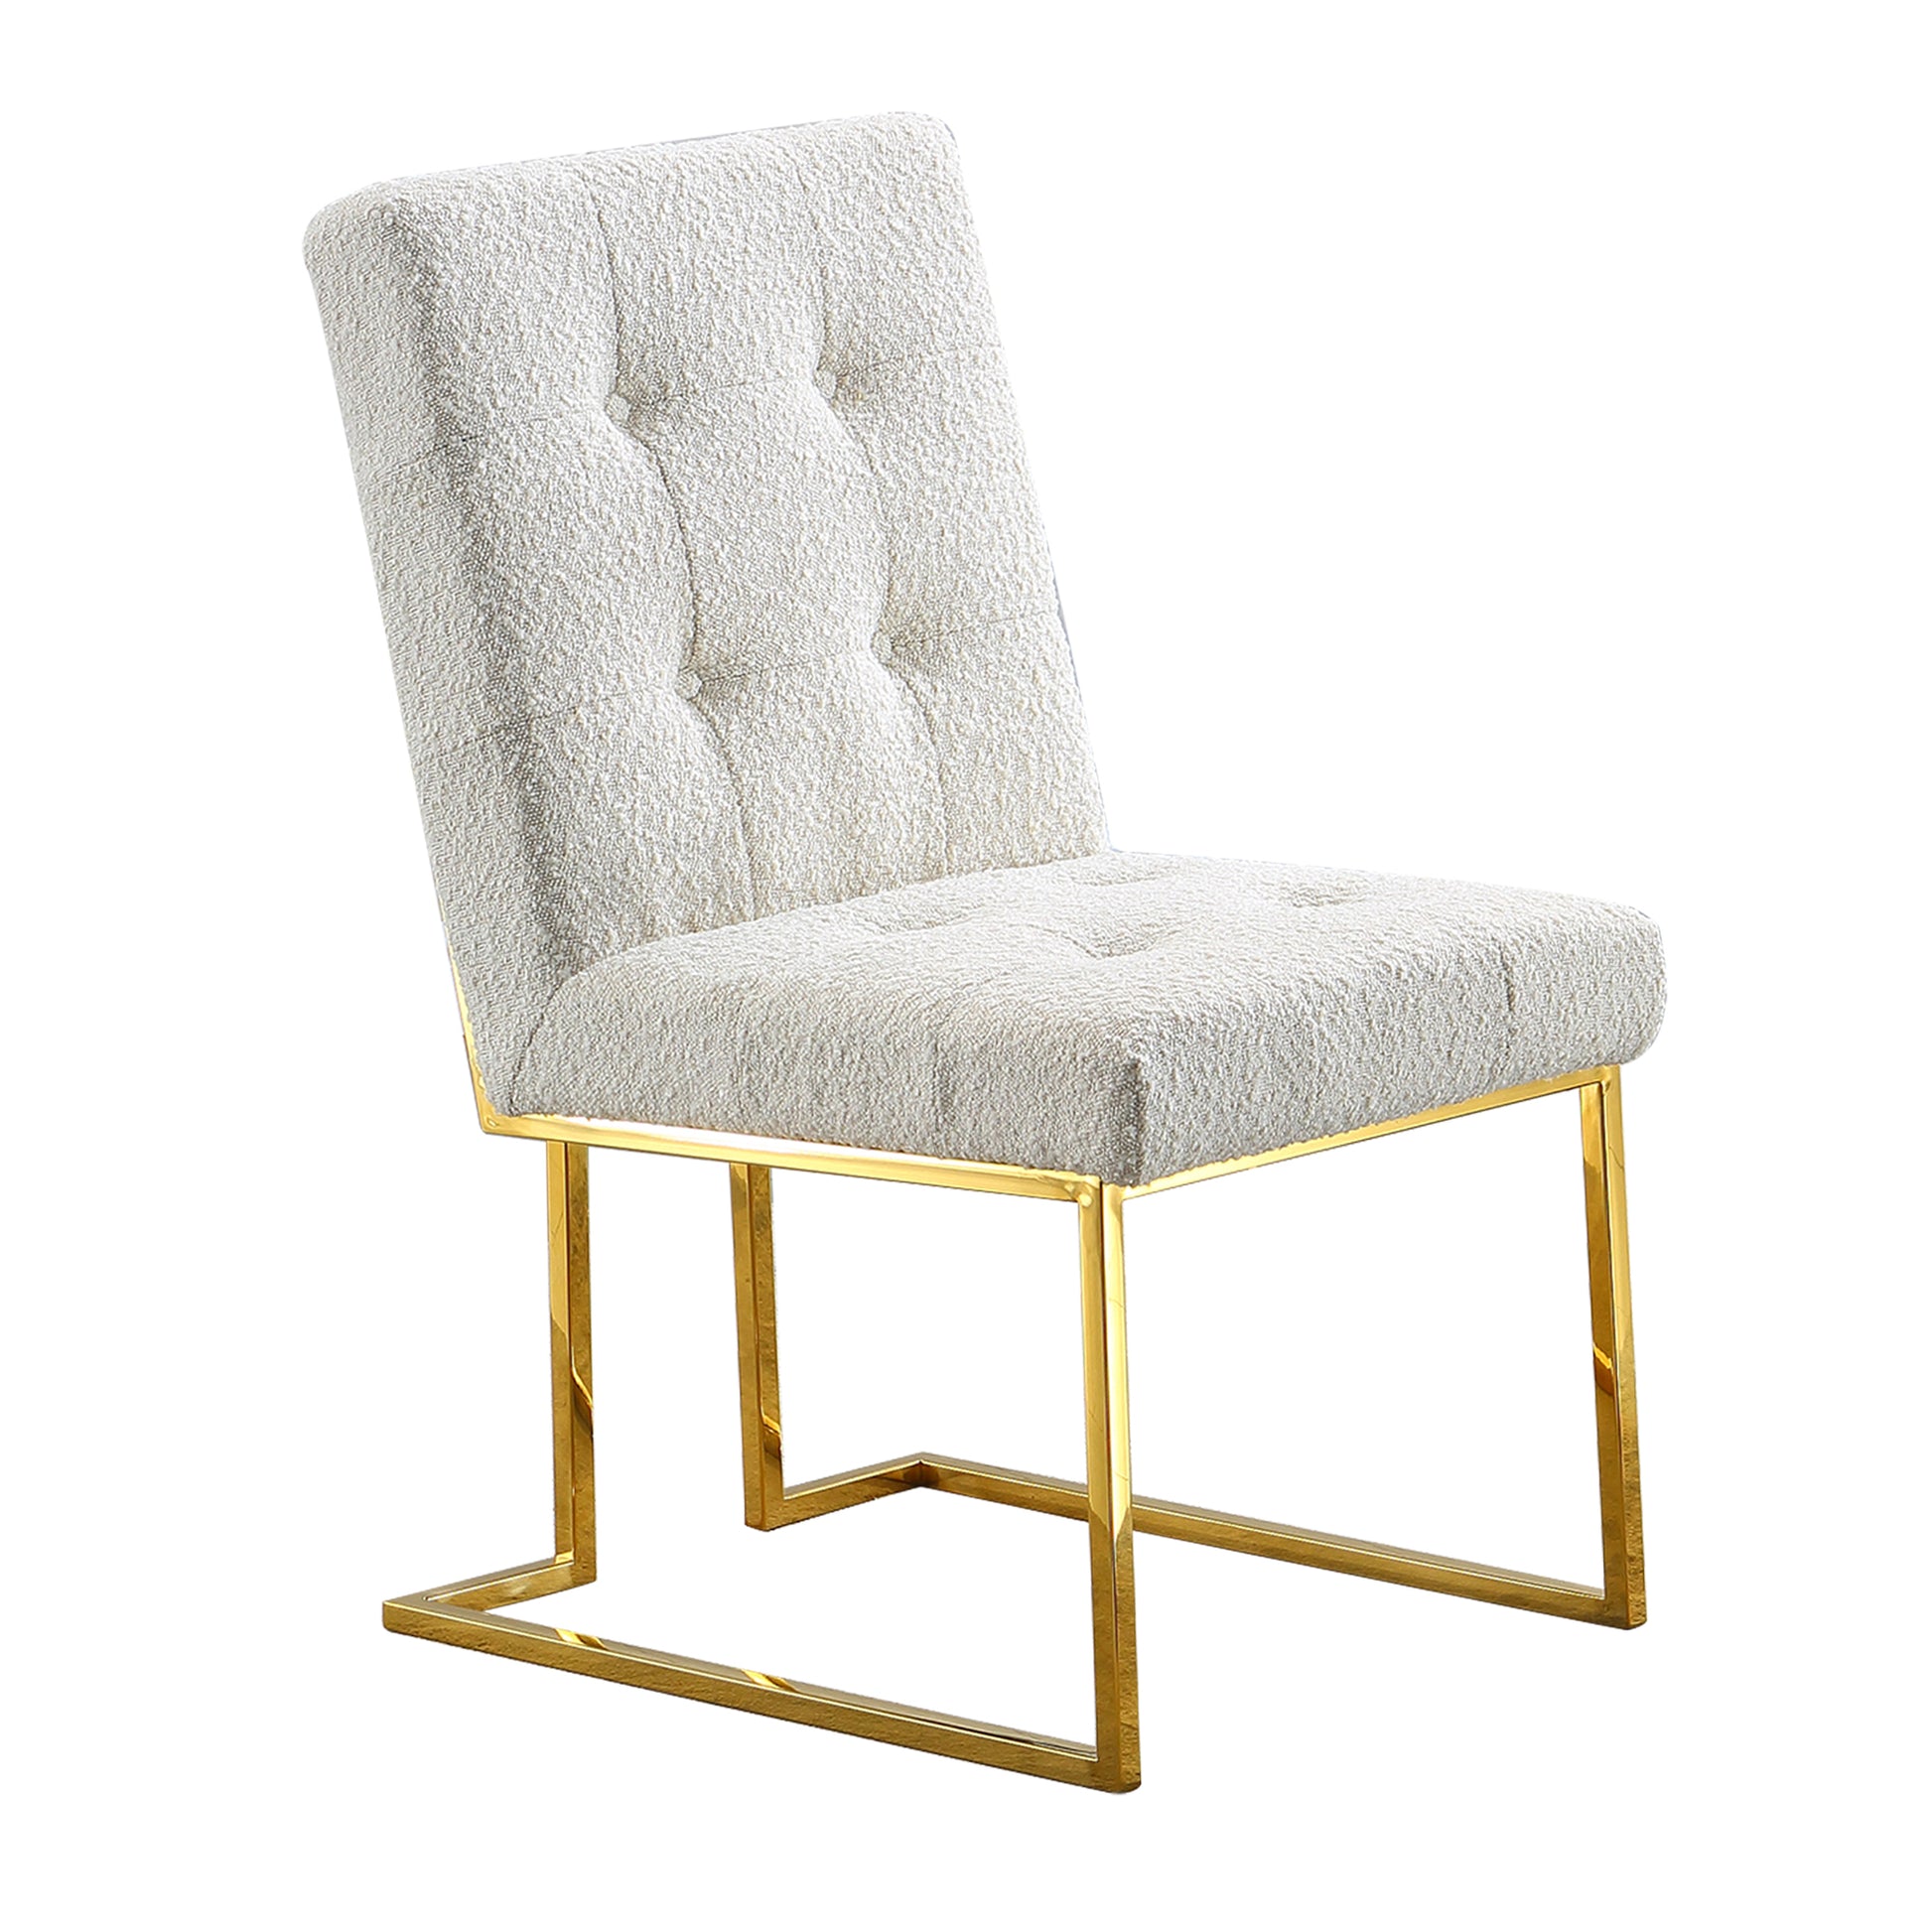 Modern Linen Dining Chair Set of 2, Tufted Design and Gold Finish Stainless Base - Enova Luxe Home Store